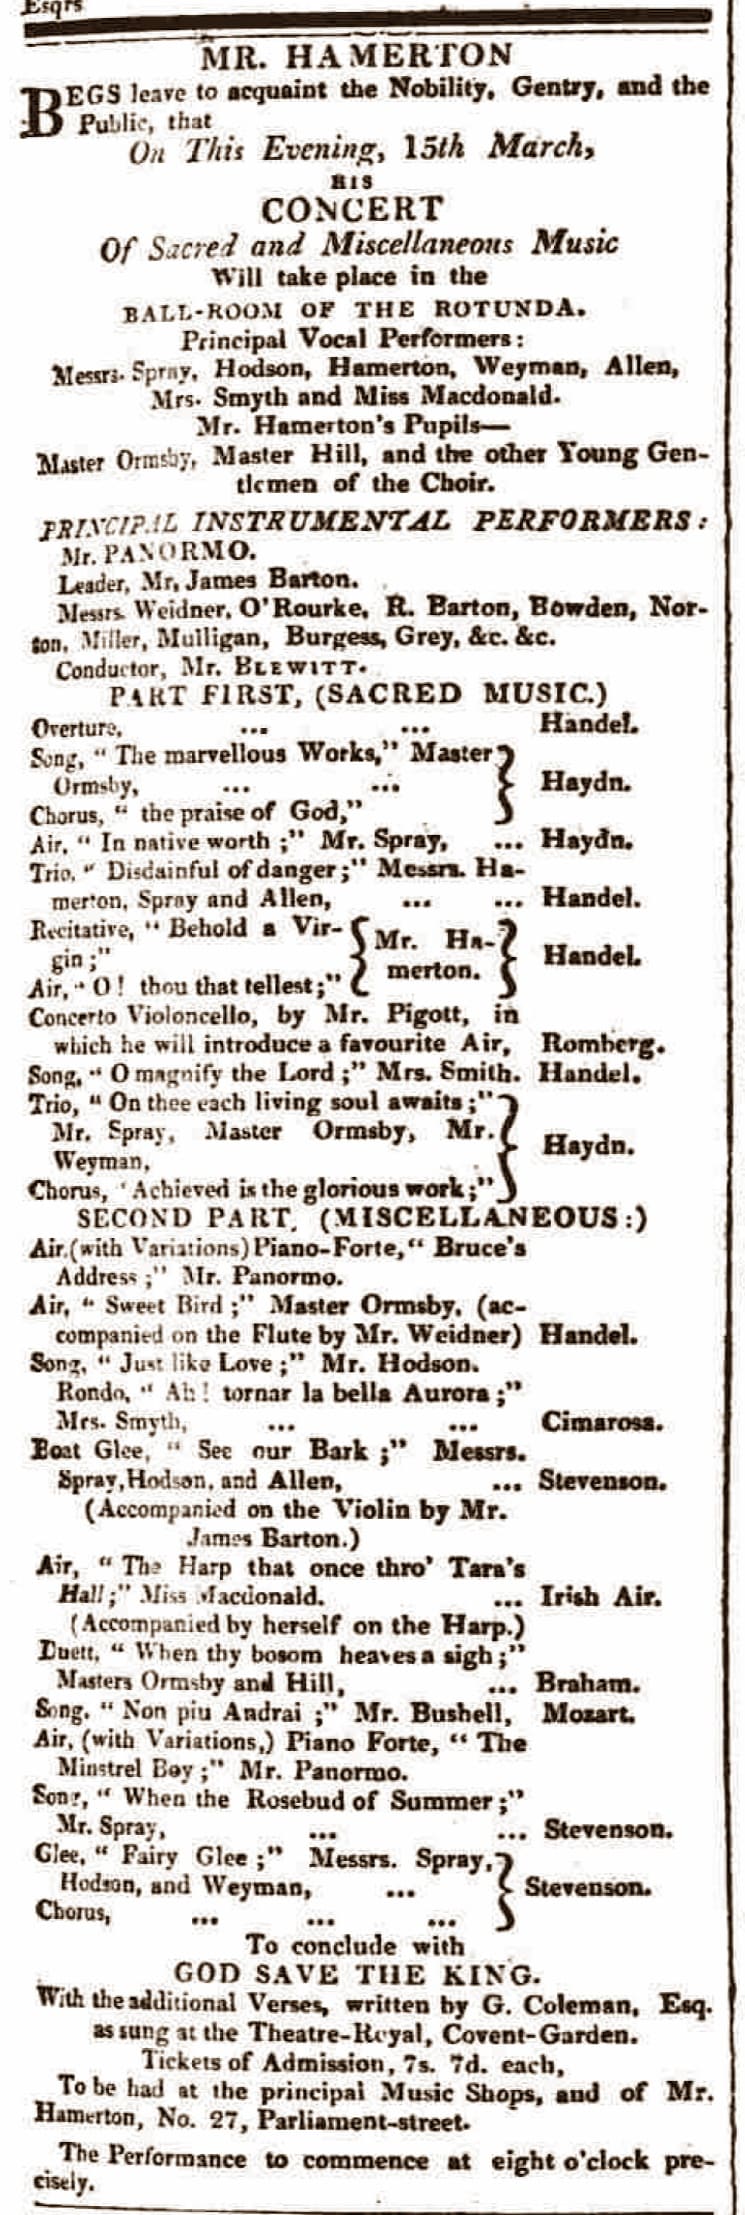 Saunders's News-Letter(15 March 1820), 3